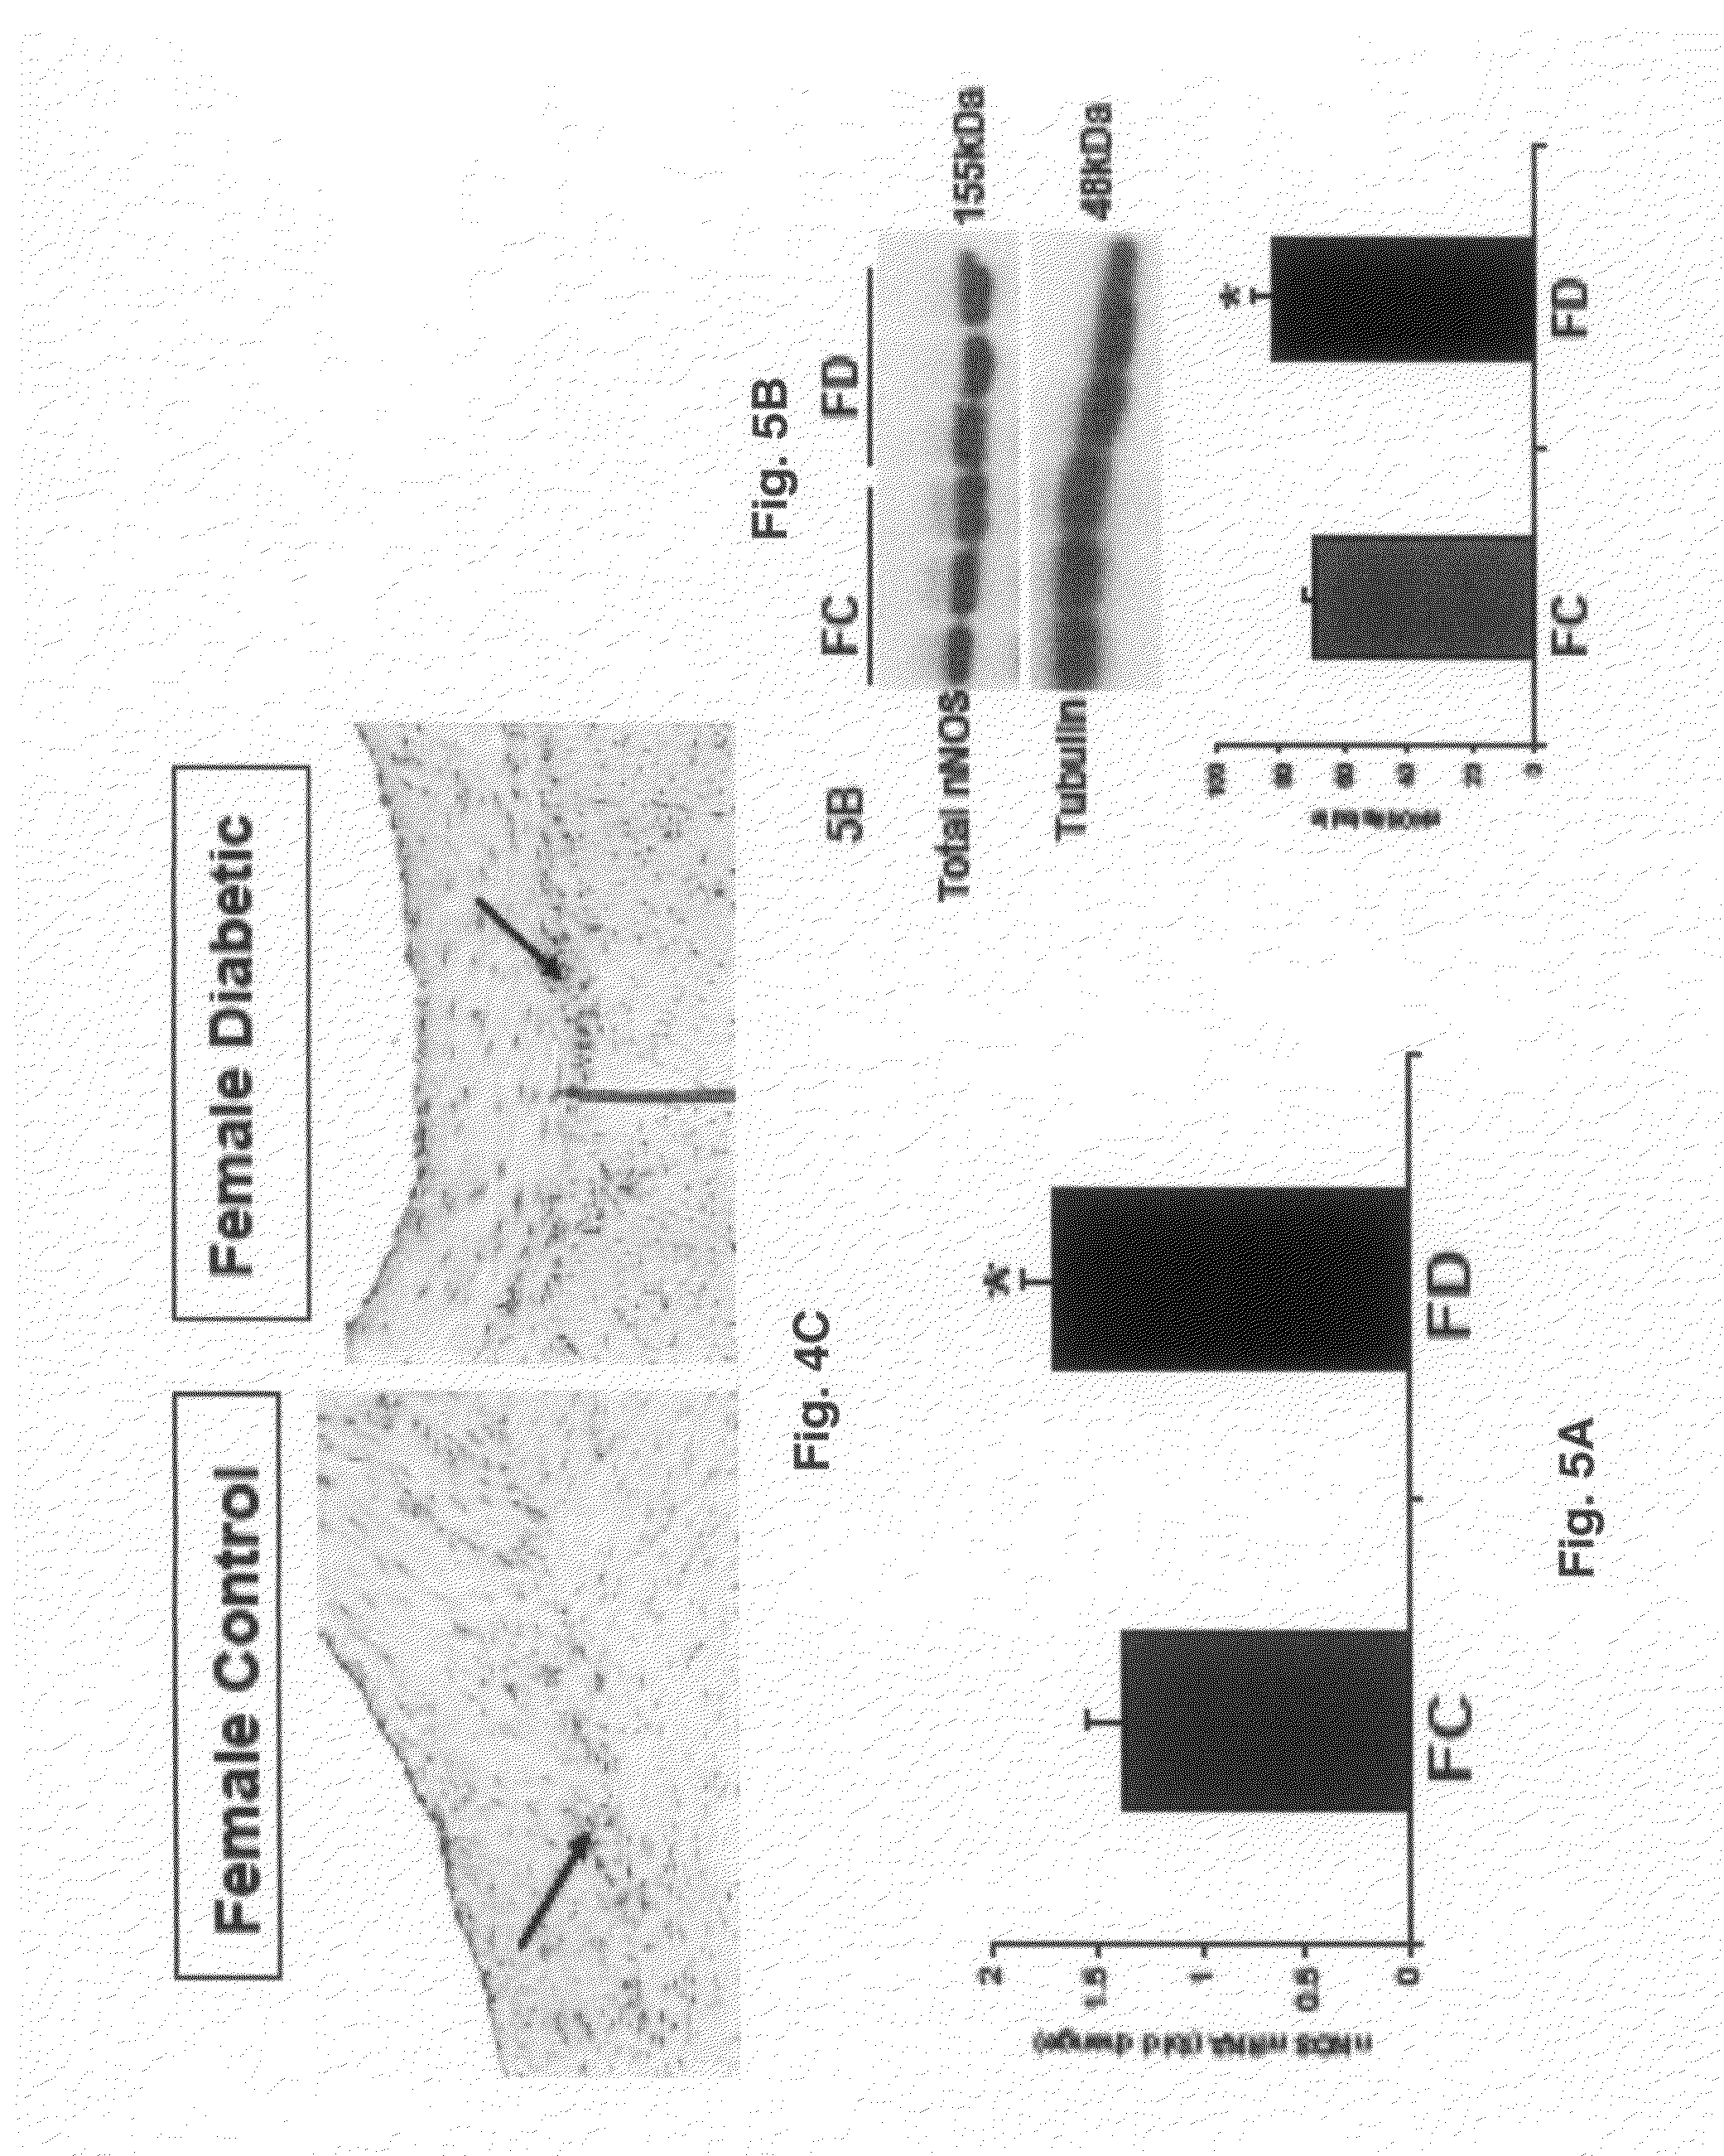 Uses of tetrahydrobiopterin and derivatives thereof